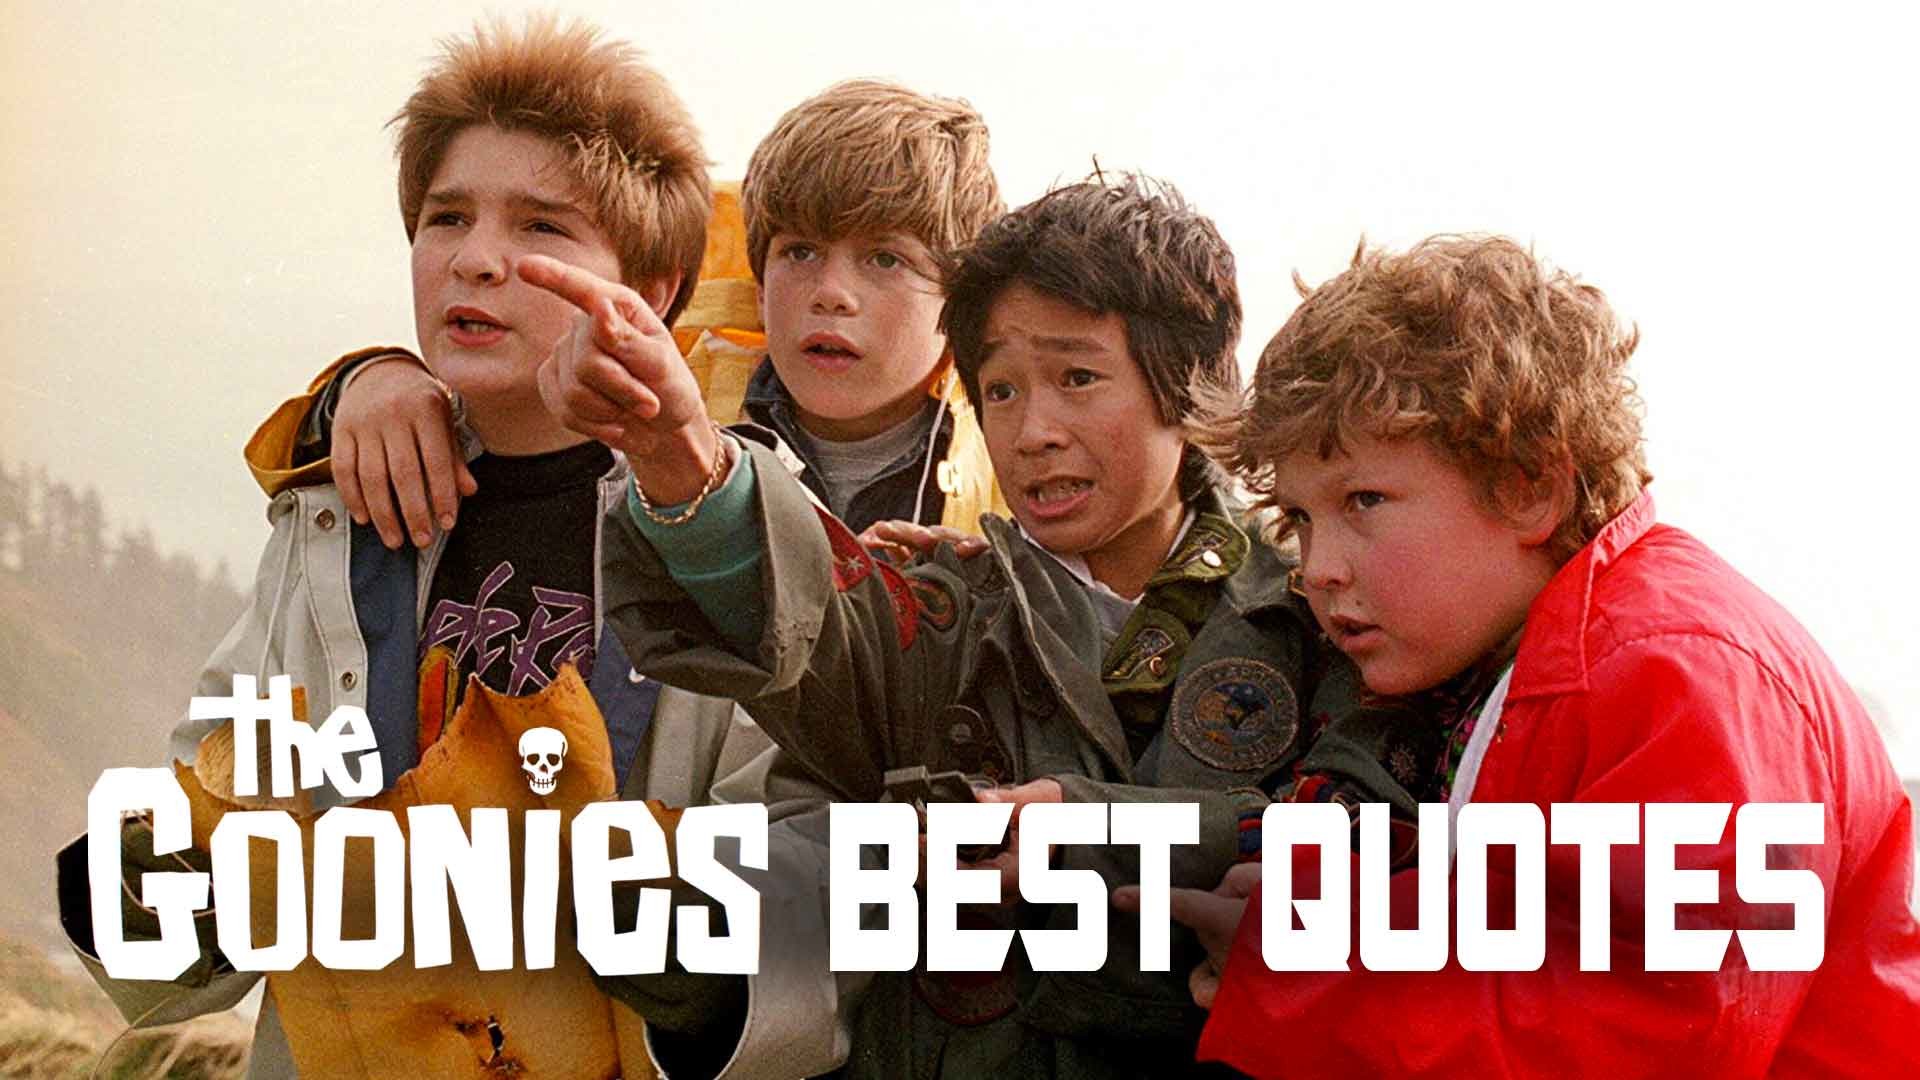 1920x1080 30 Awesome Goonies Quotes from the Classic Steven Spielberg Film